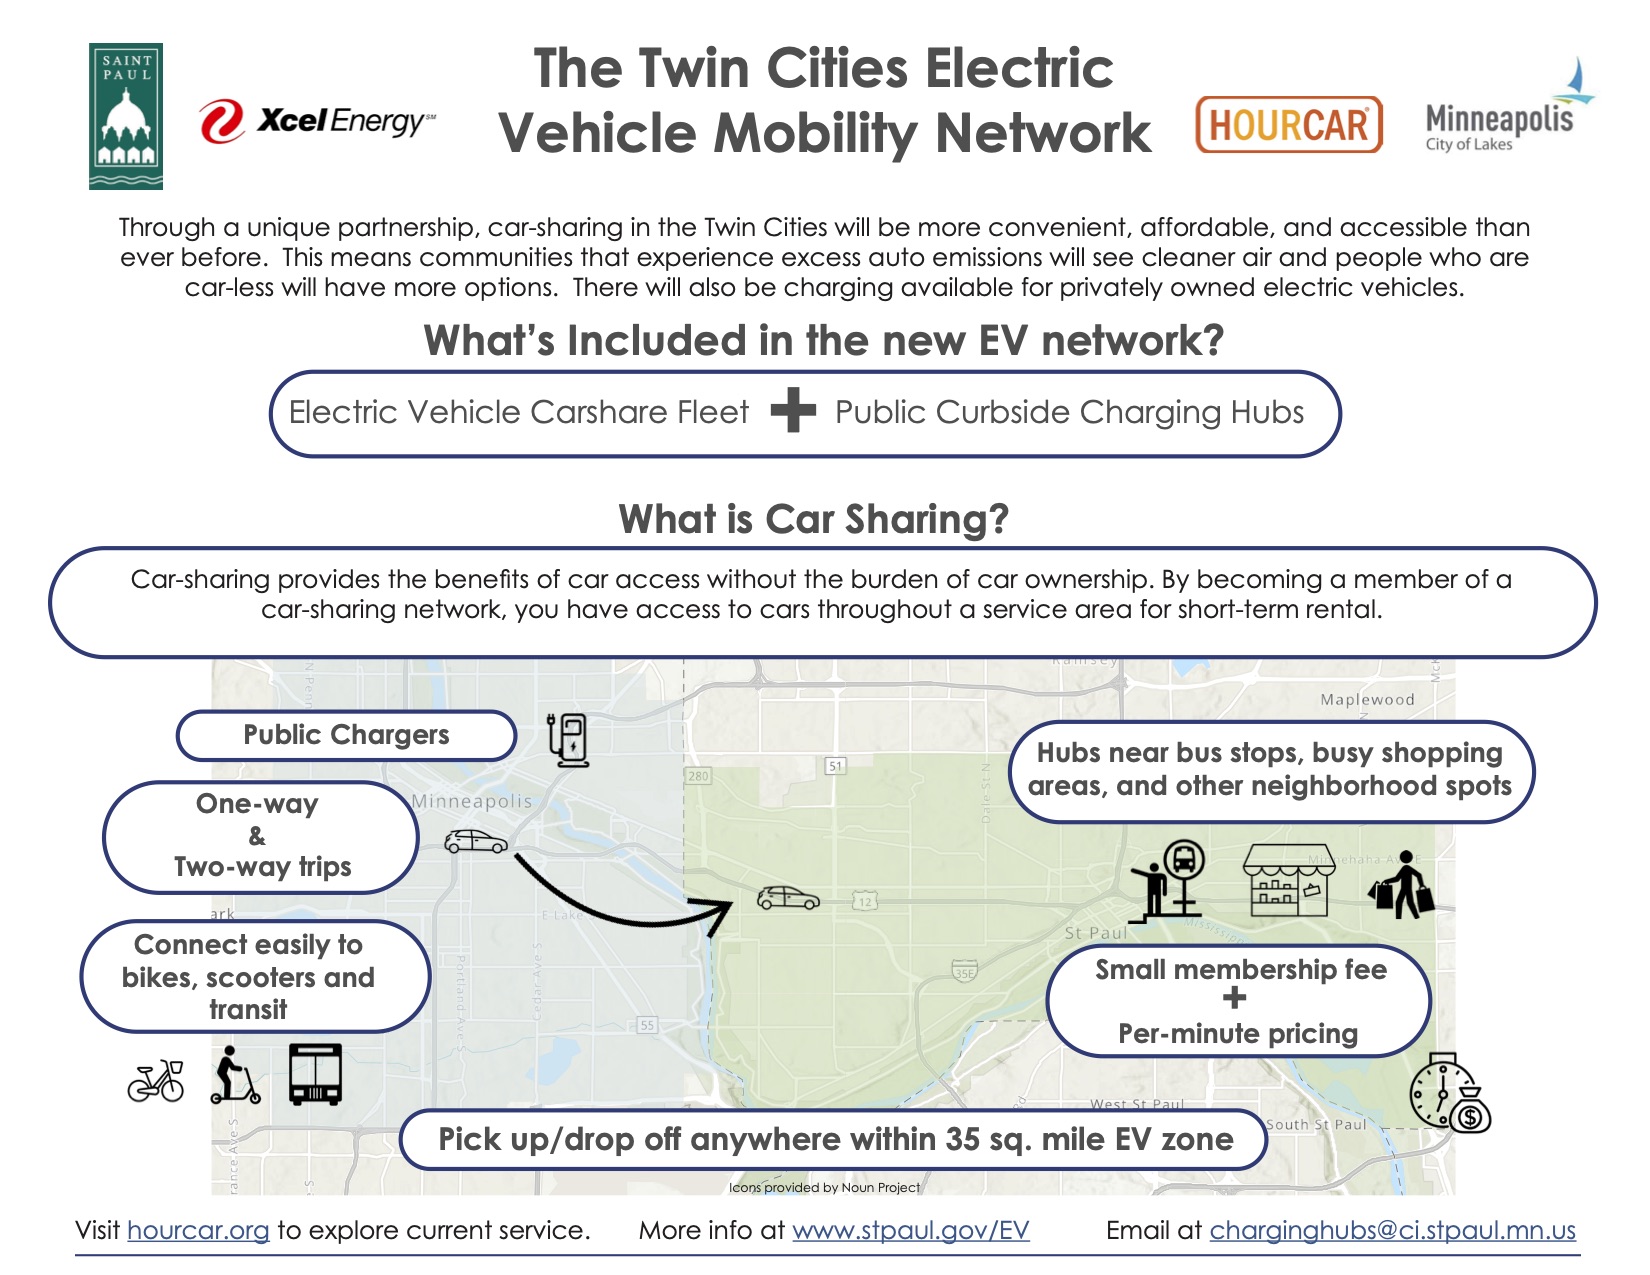 Through a unique partnership, car-sharing in the Twin Cities will be more convenient, affordable, and accessible than ever before. This means communities that experience excess auto emissions will see cleaner air and people who are car-less will have more options. There will also be charging available for privately owned electric vehicles. Included in the new EV network is an electric vehicle car-share fleet and public curbside charging hubs. Car-sharing provides the benefits of car access without the burden of car ownership. By becoming a member of a car-sharing network, you have access to cars throughout a service area for short-term rental. You can take one-way or two-way trips and connect easily to bikes, scooters, and transit. You can pick up and drop off anywhere within a 35 sq. mile service area, paying a small membership fee and per-minute pricing. The hubs are also near bus stops, busy shopping areas, and other neighborhood spots. Visit hourcar.org to explore current service. You can visit www.stpaul.gov/EV or email charginghubs@ci.stpaul.mn.us for more info about the project.